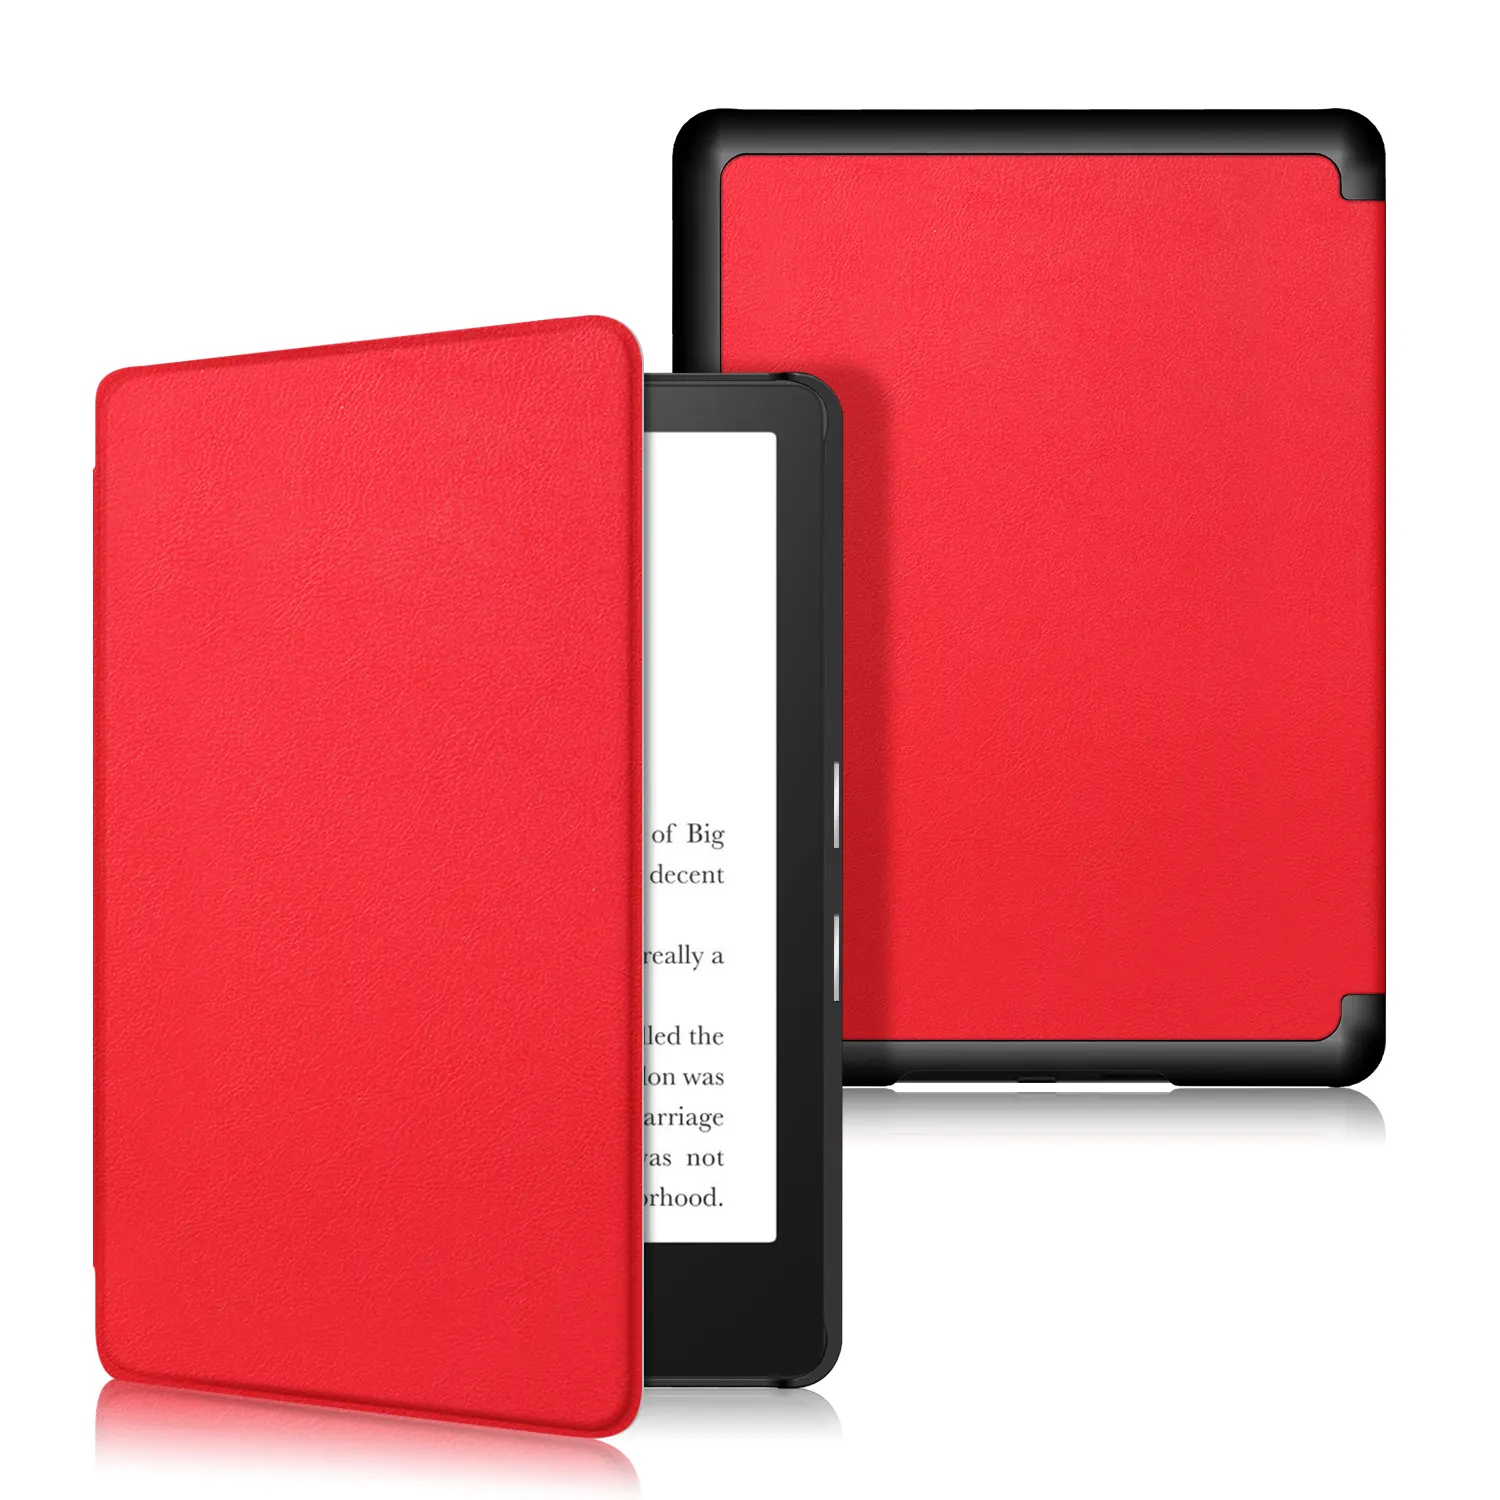 Solid color customizable pattern cover for e-book reader of new Kindle paperwhite 11th generation 2021 release